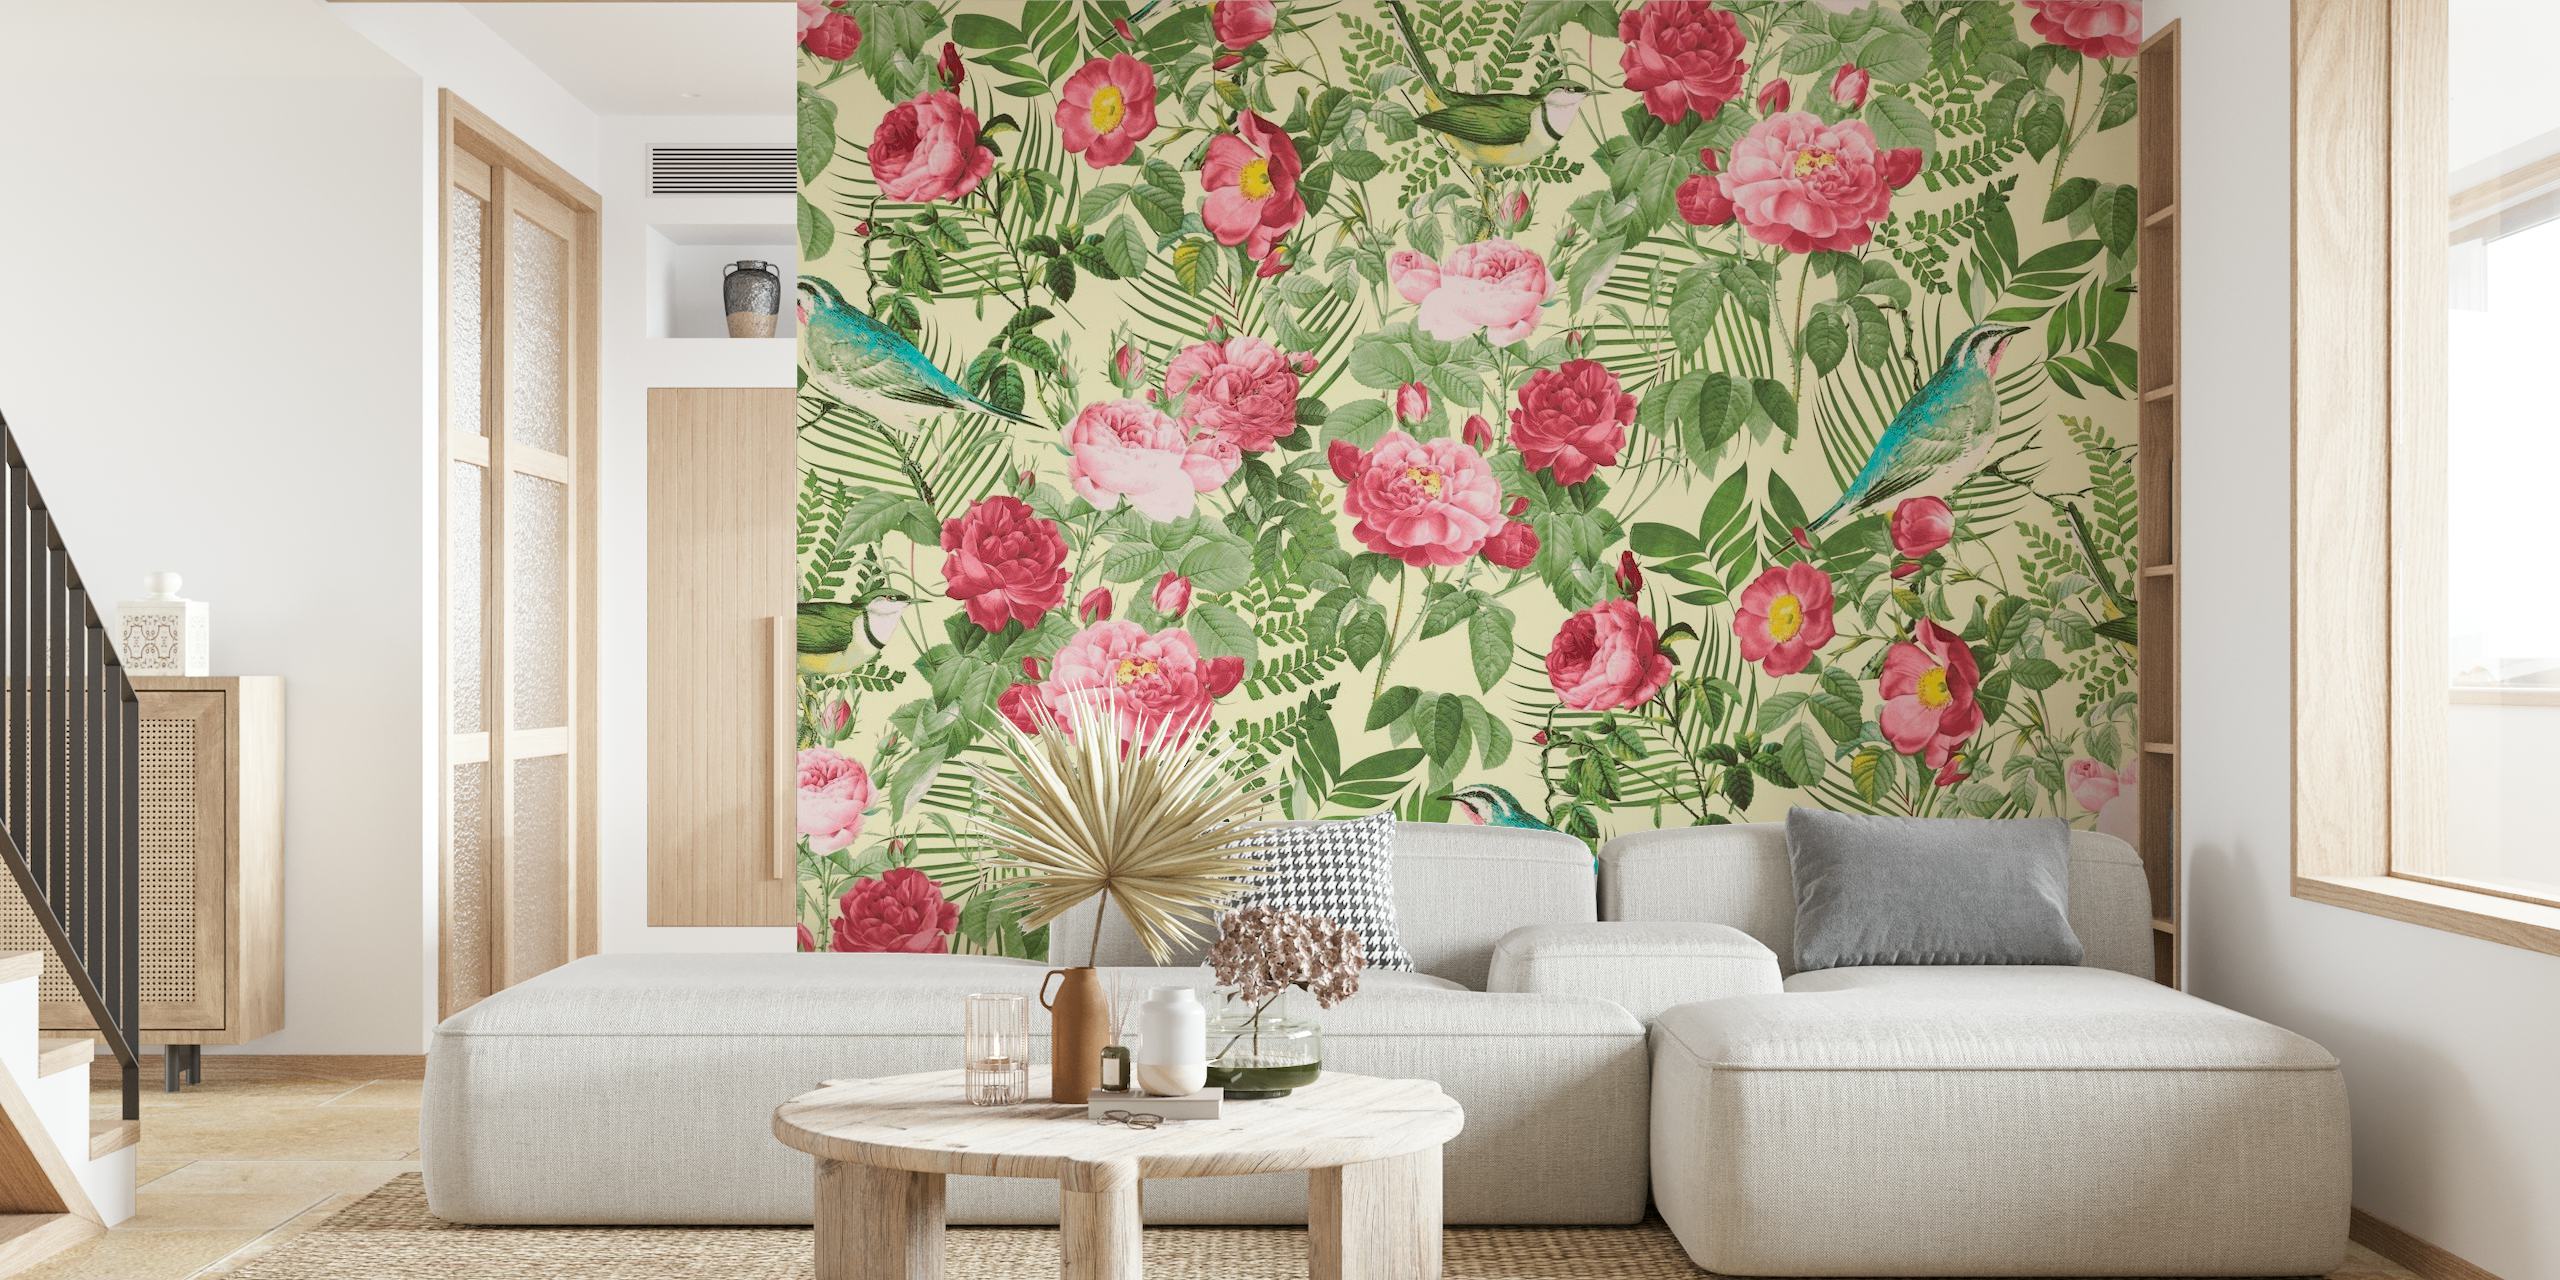 Vintage Redoute Roses Wall Mural with blooming pink and yellow roses and lush greenery on a pastel background